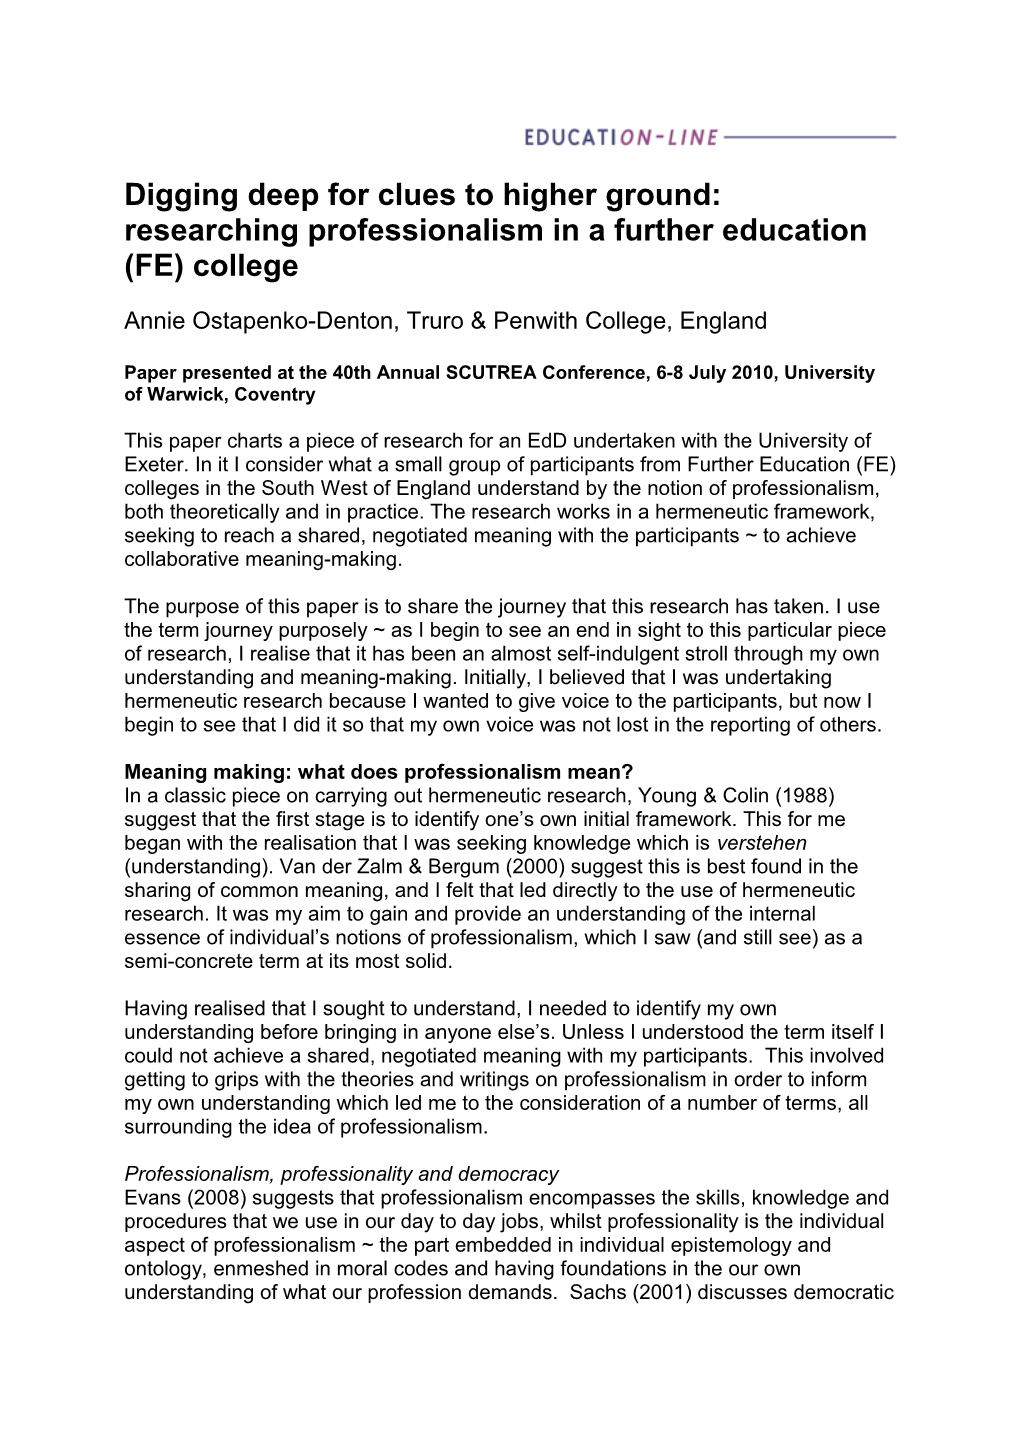 Digging Deep for Clues to Higher Ground: Researching Professionalism in a Further Education